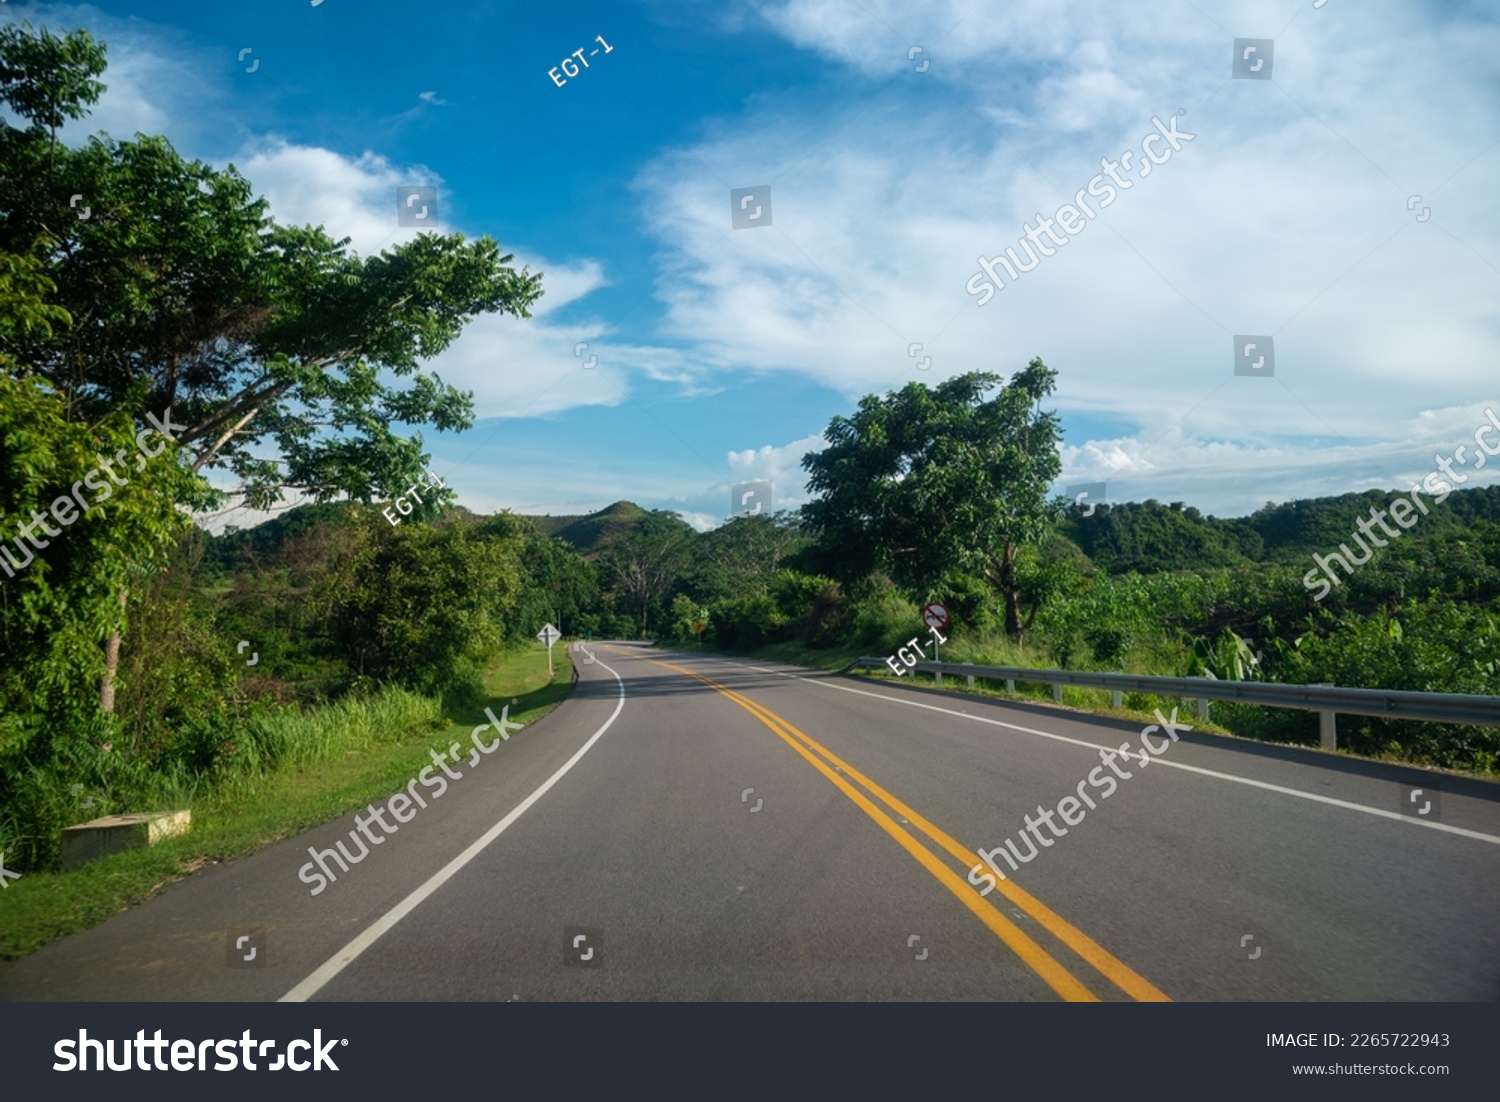 Highway in the Colombian countryside with a no overtaking traffic sign on the road. #2265722943